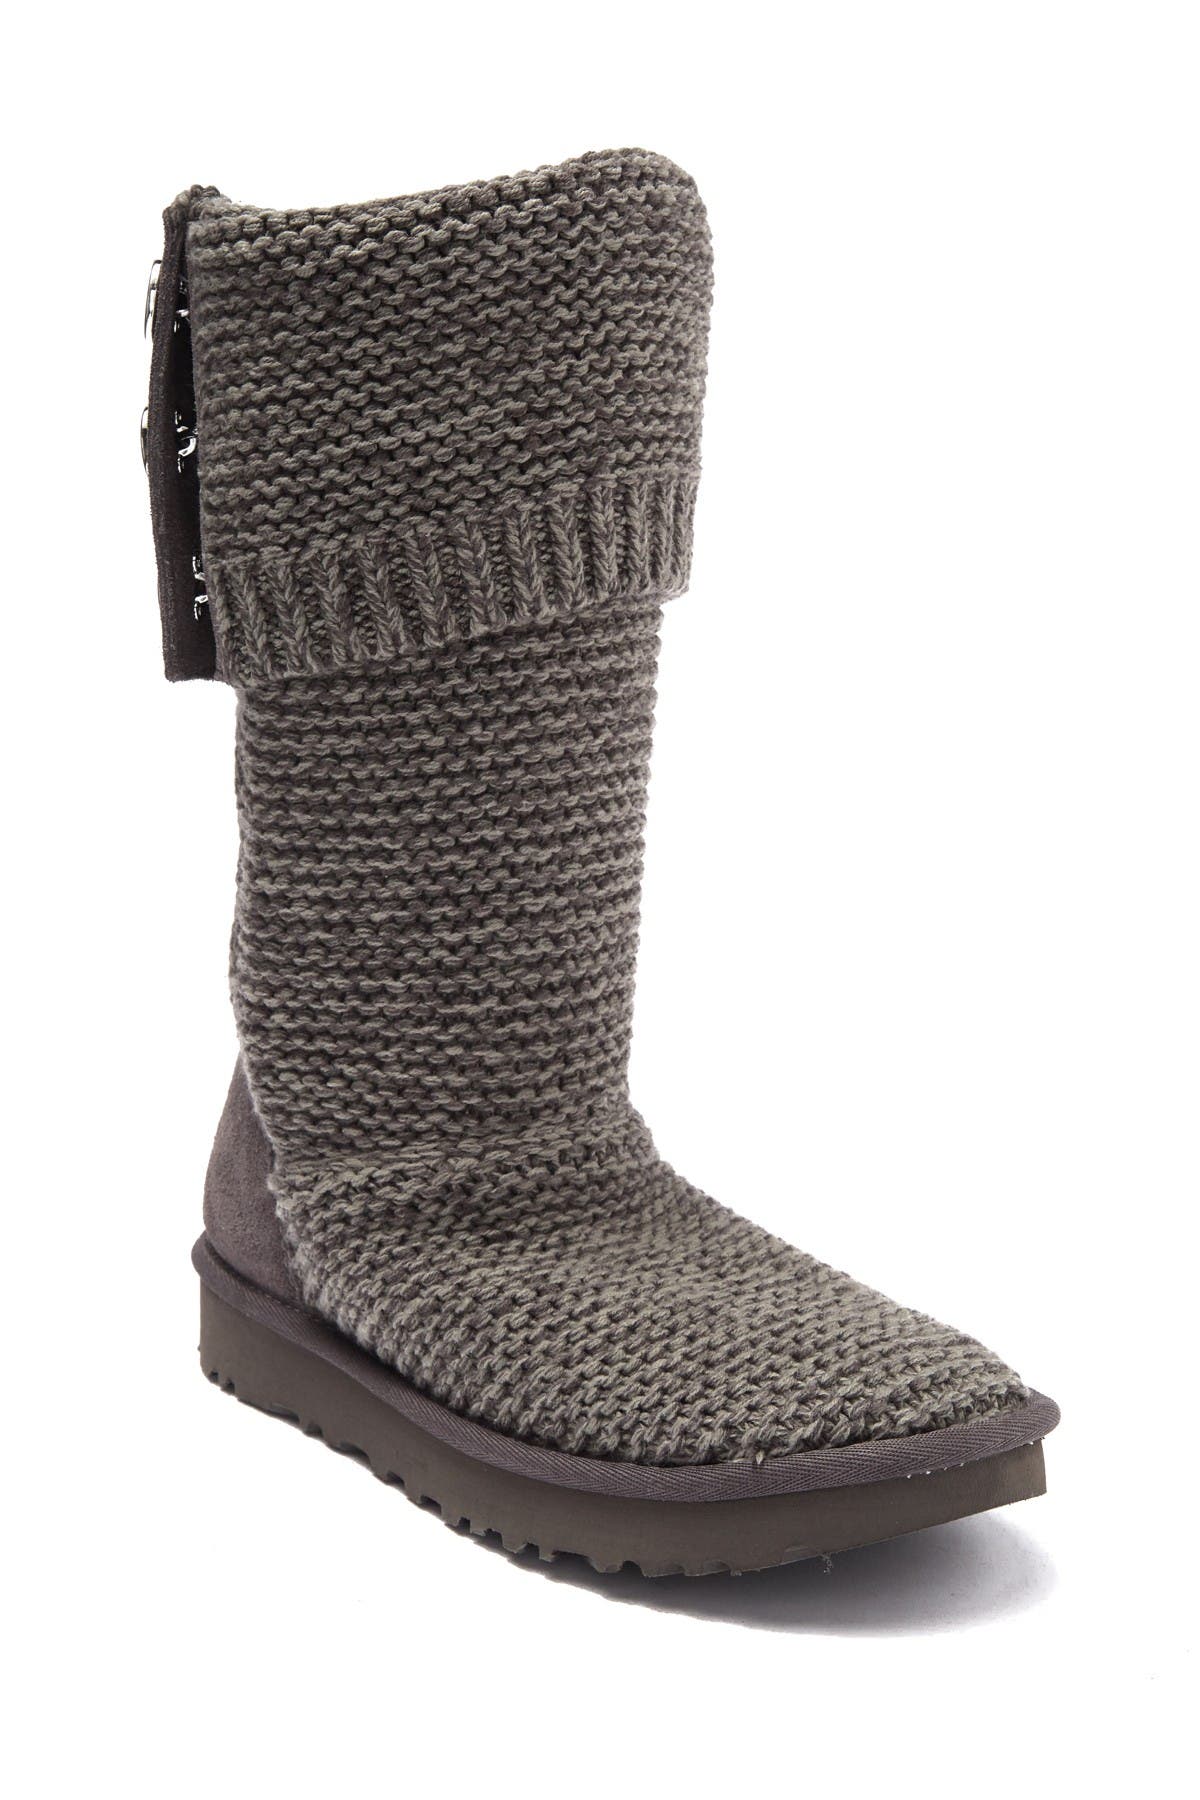 purl cardy knit boot ugg